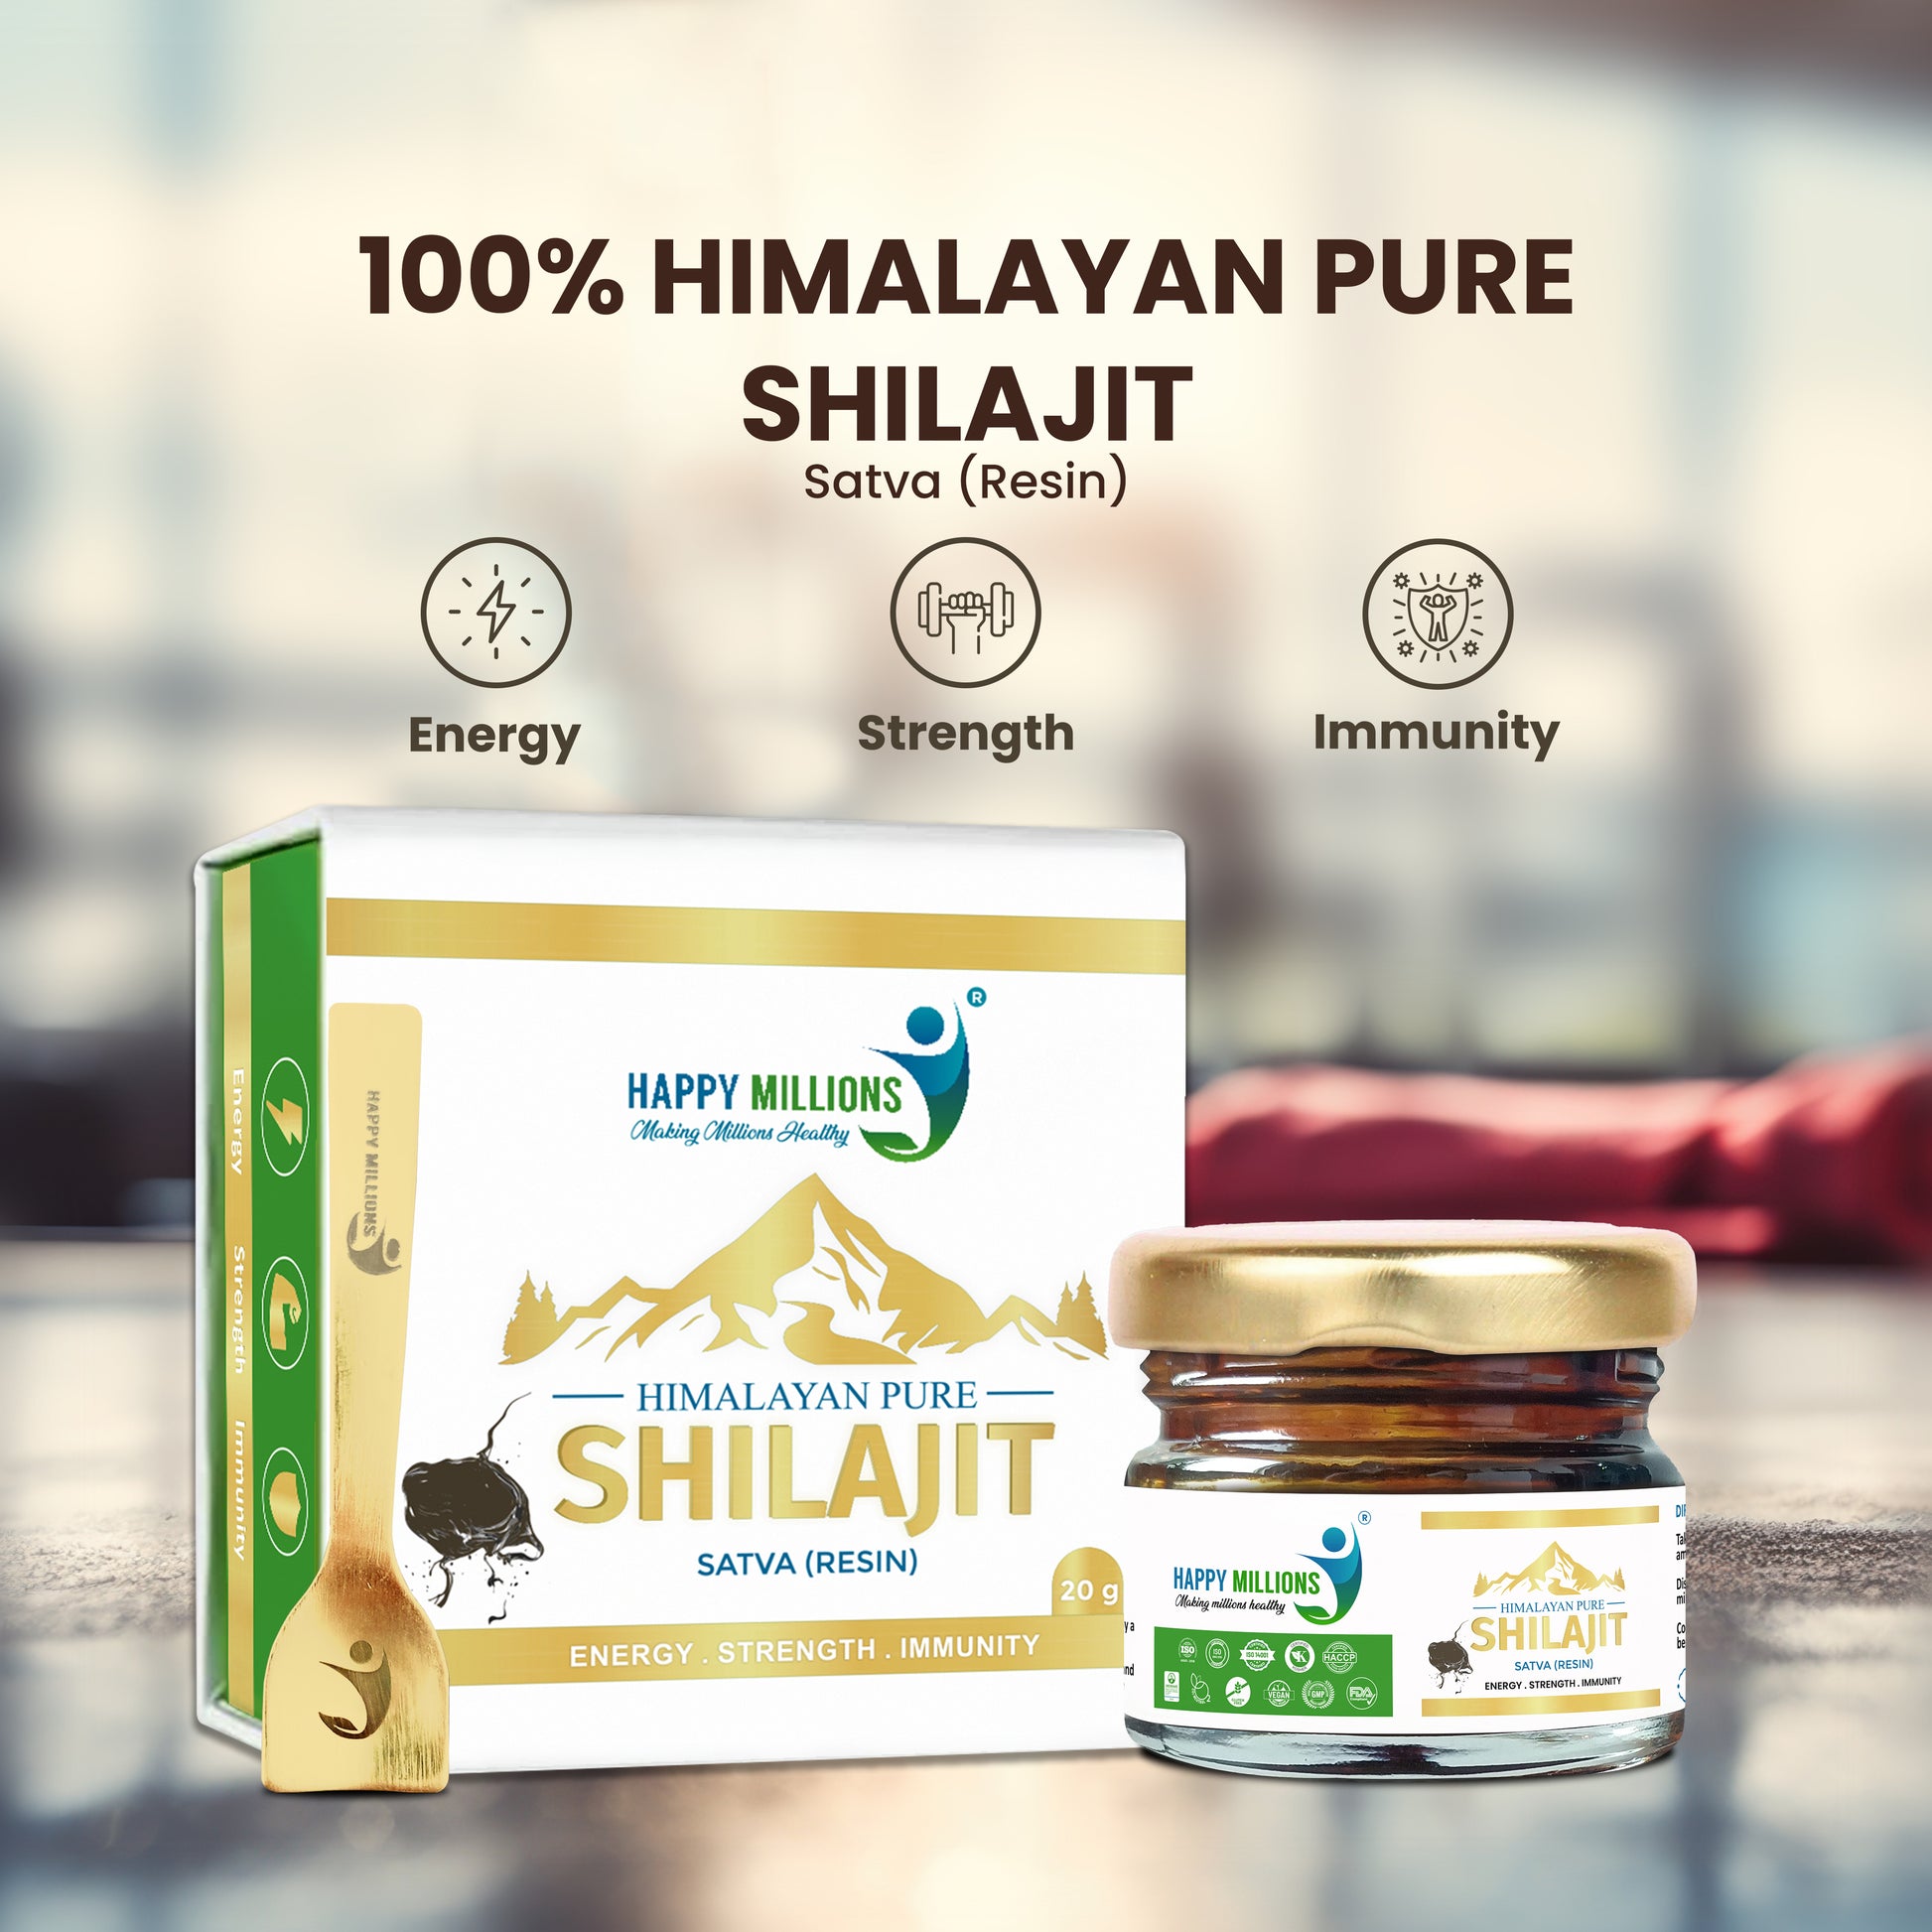 Unlock Vitality Discover Happy Millions Shilajit Resin Benefits with Energy, Anti-Aging, and Wellness Keywords.